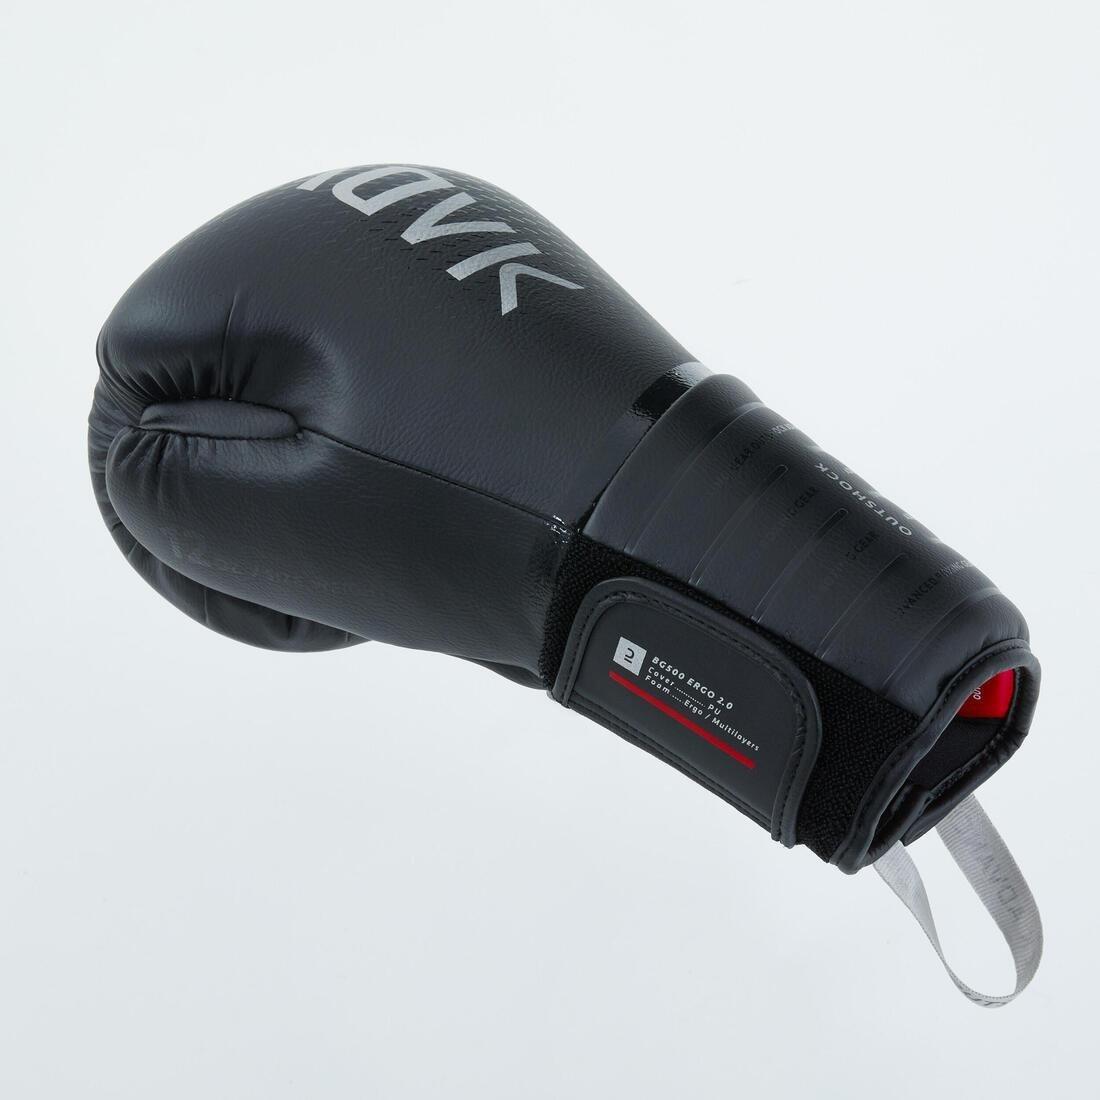 OUTSHOCK - Boxing Gloves - 500, White